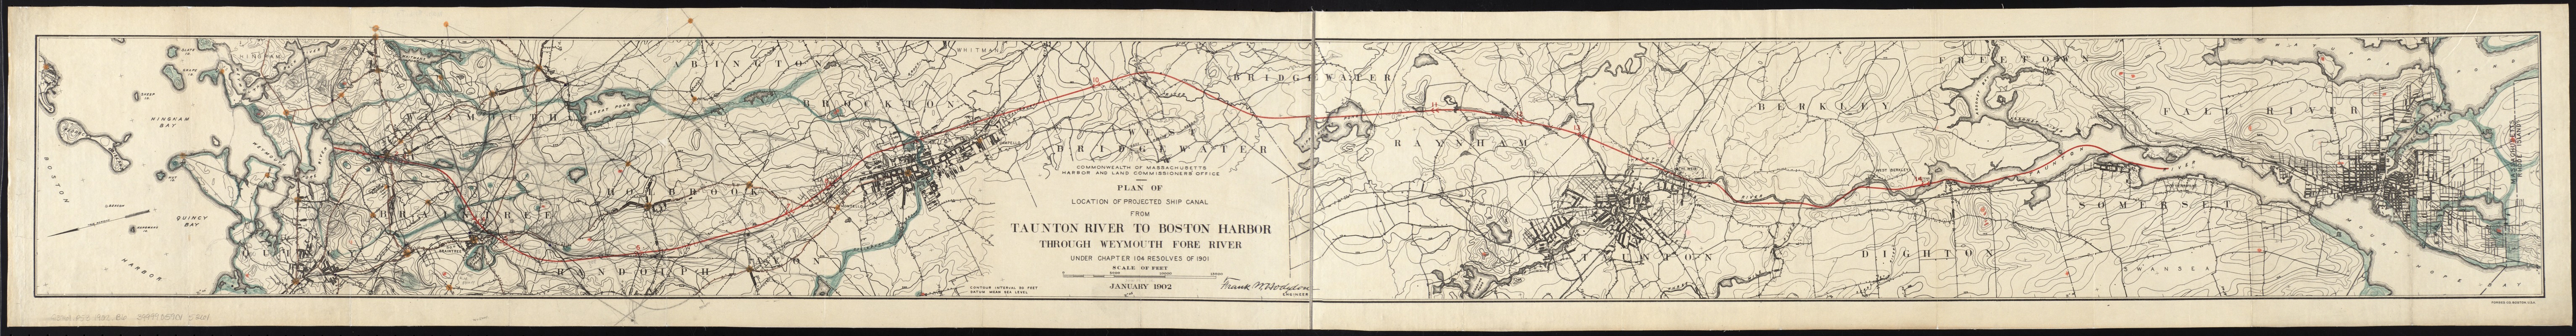 Plan of location of projected ship canal from Taunton River to Boston Harbor, through Weymouth Fore River ... Frank W. Hodgdon, engineer